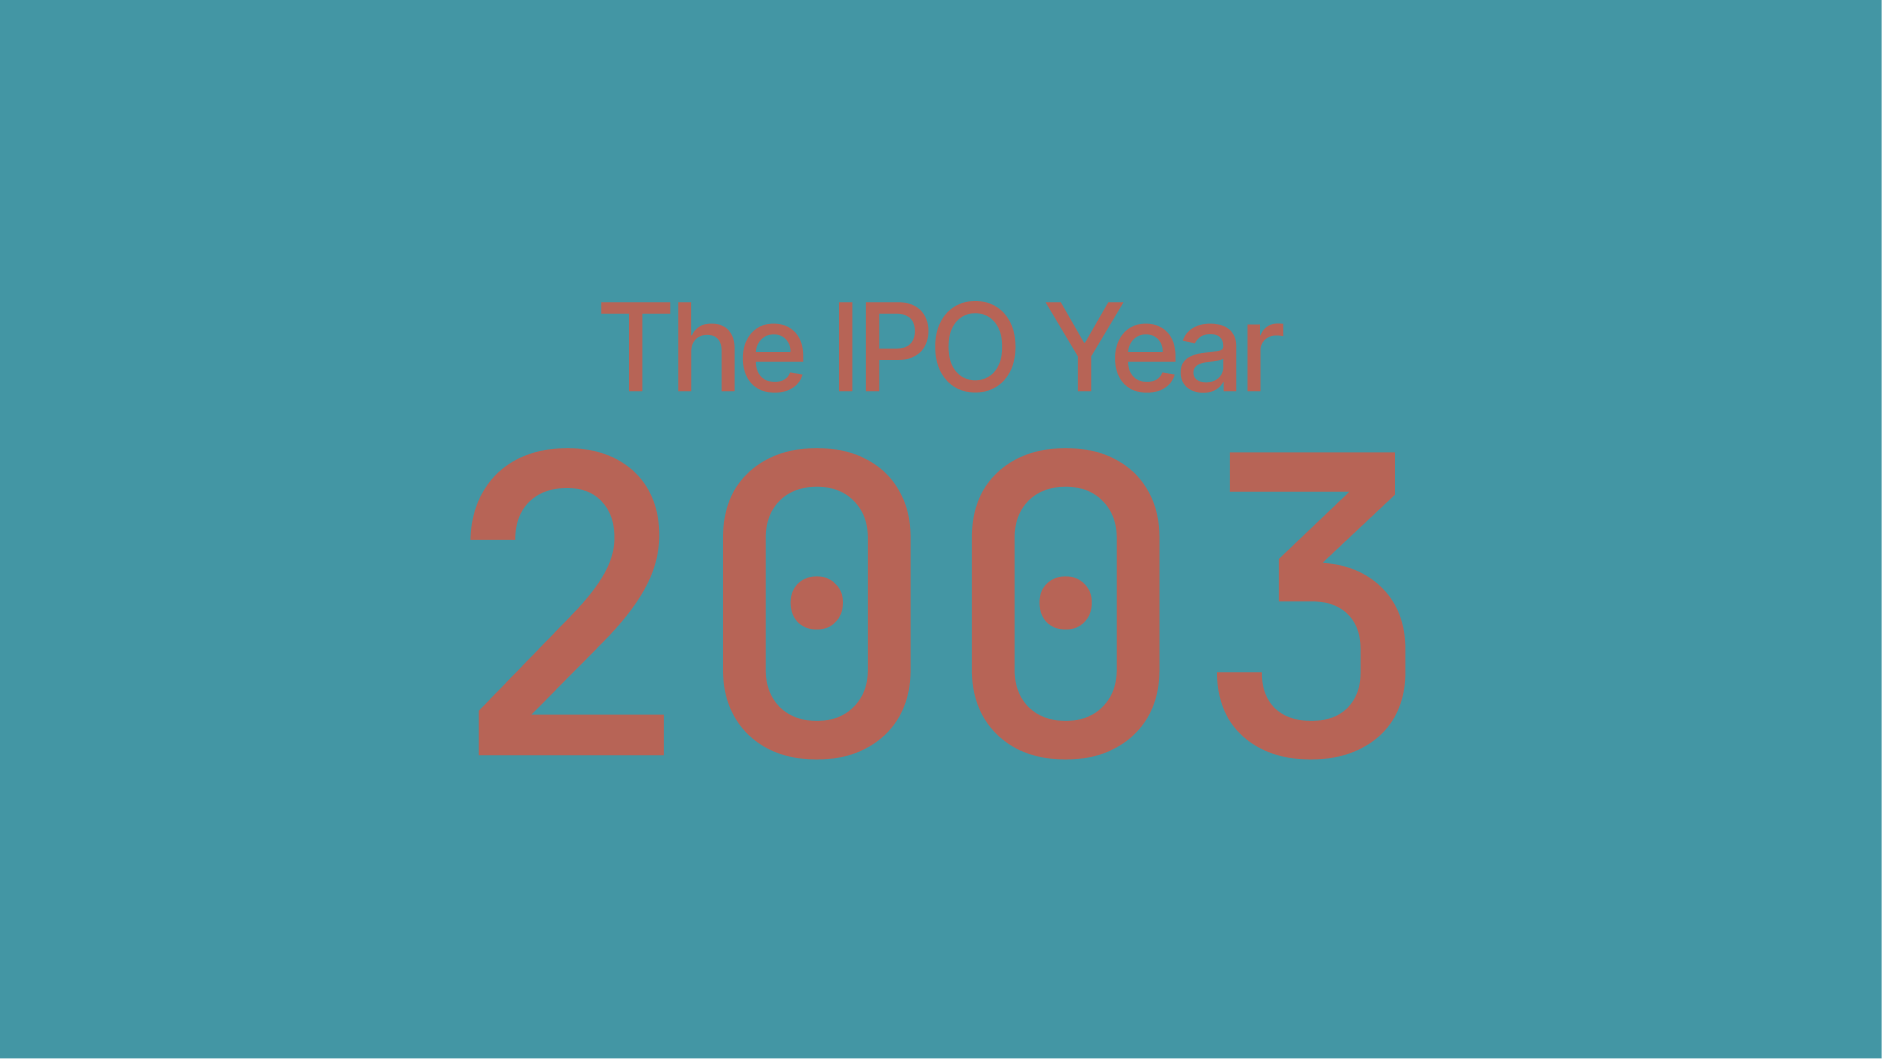 Initial Public Offerings - IPOs in 2003